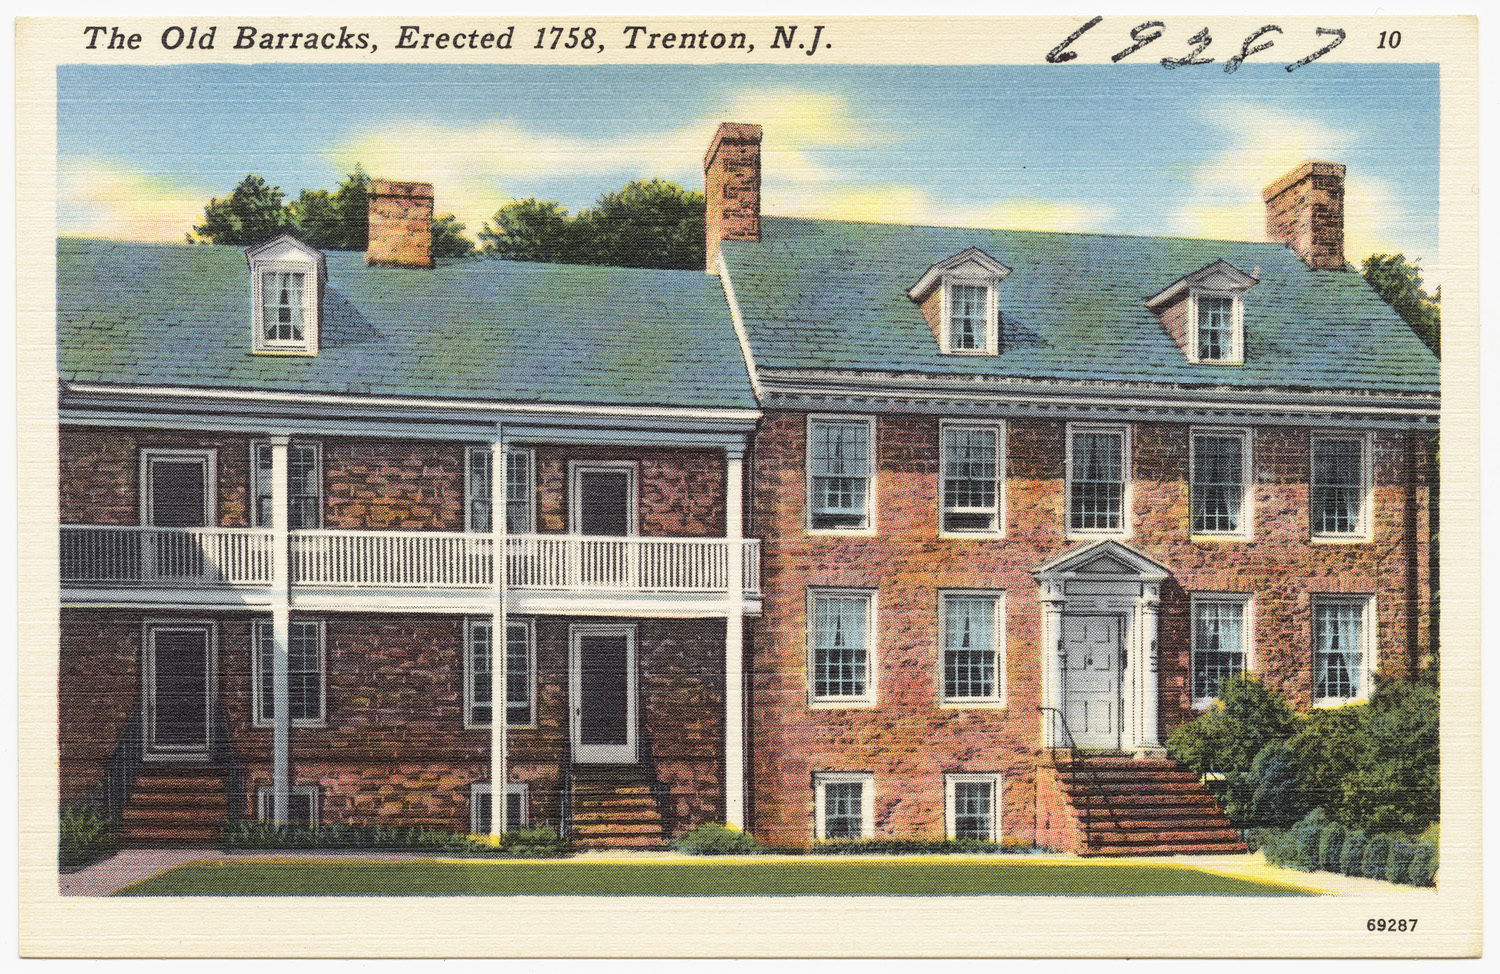 a brick house with porch and balconies